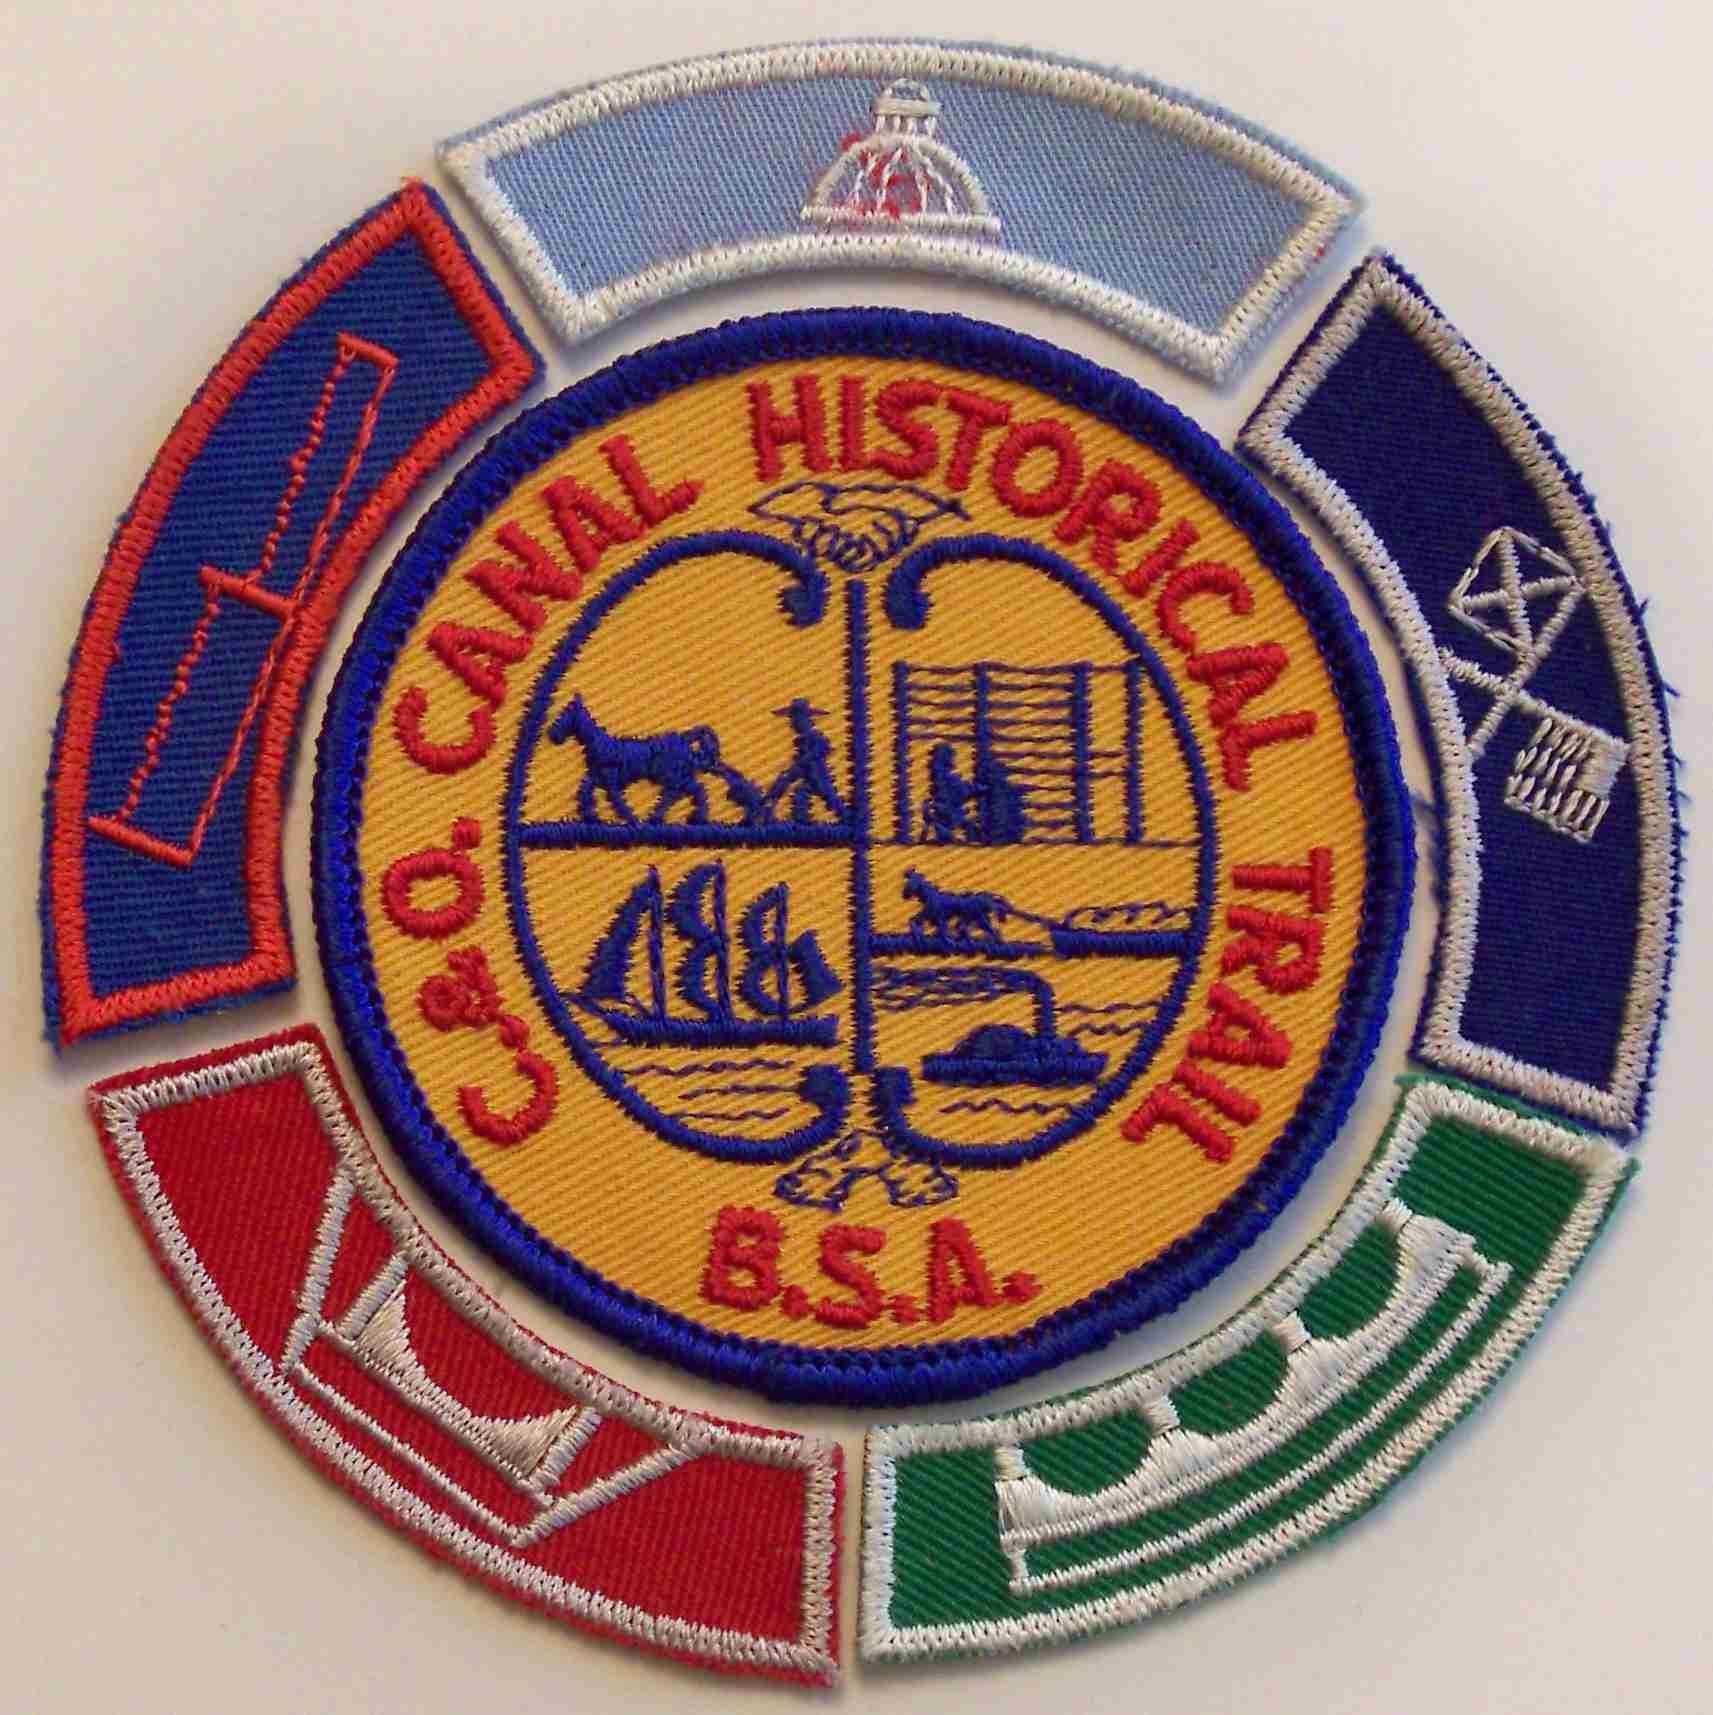 Details about   BOY SCOUT LICENSED CHESAPEAKE OHIO C&O CANAL NATIONAL PARK JACKET PATCH CAMP 